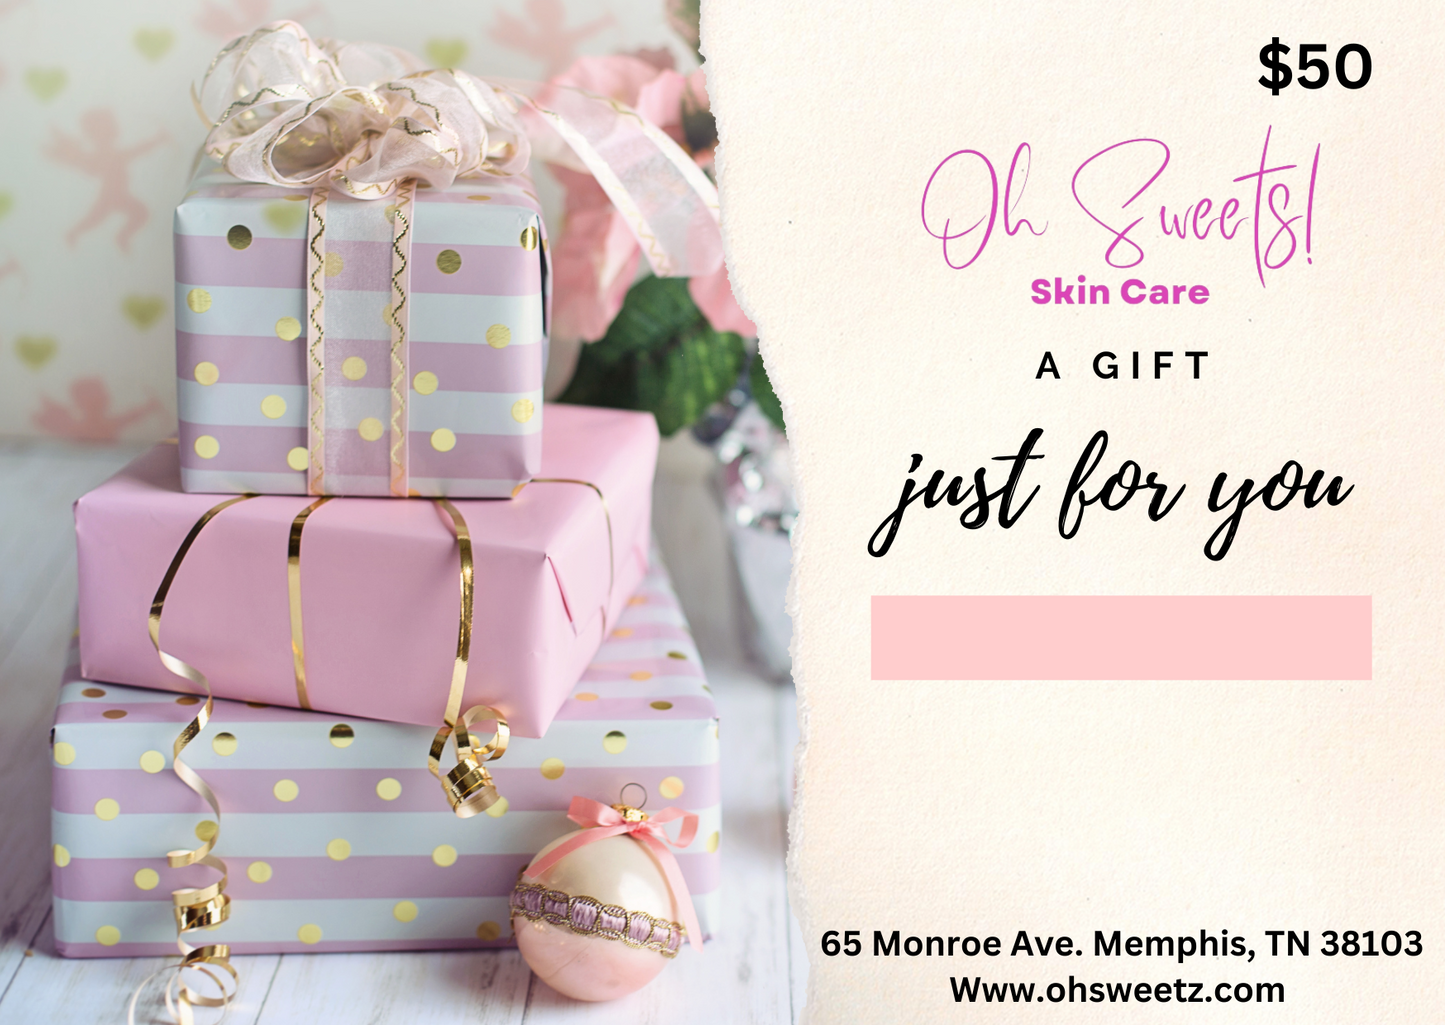 Oh Sweets! Skin Care Gift Card